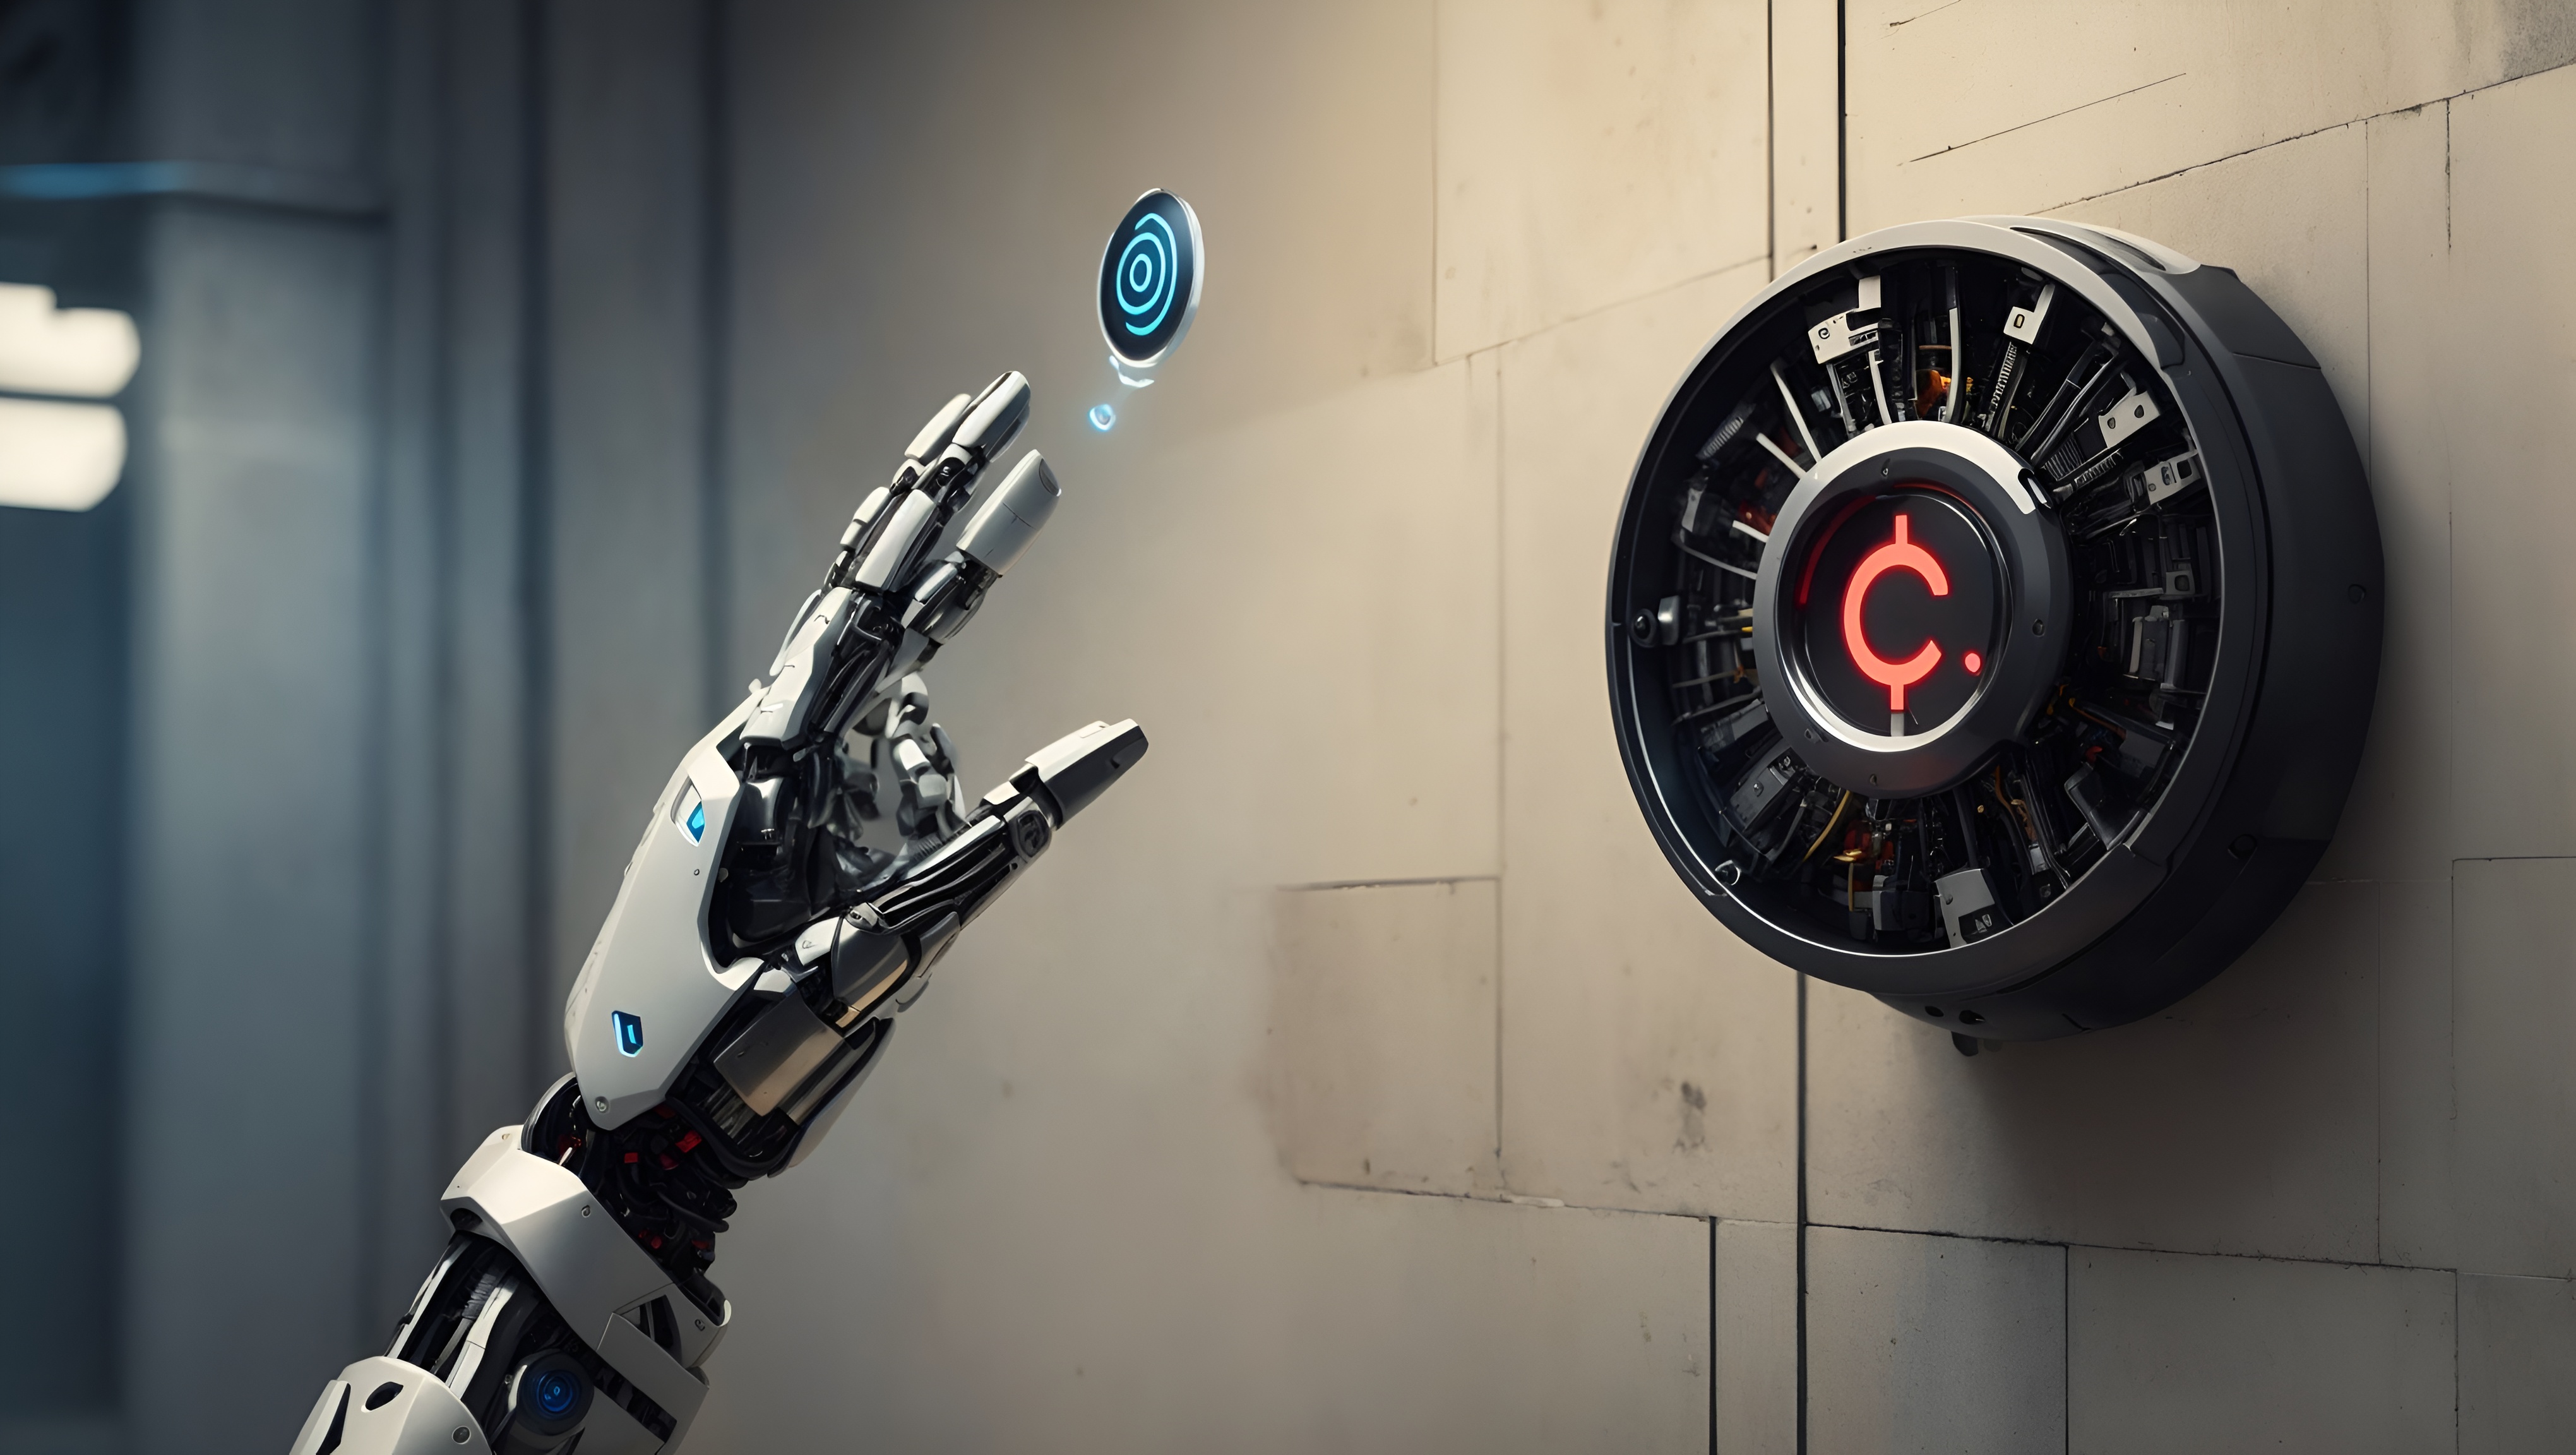 An intricately designed robotic hand, representing GPTBot, stretches out towards a towering wall adorned with copyright symbols of various media types: images, text, music, videos, etc. This image symbolizes the potential copyright challenges GPTBot may face during data collection.